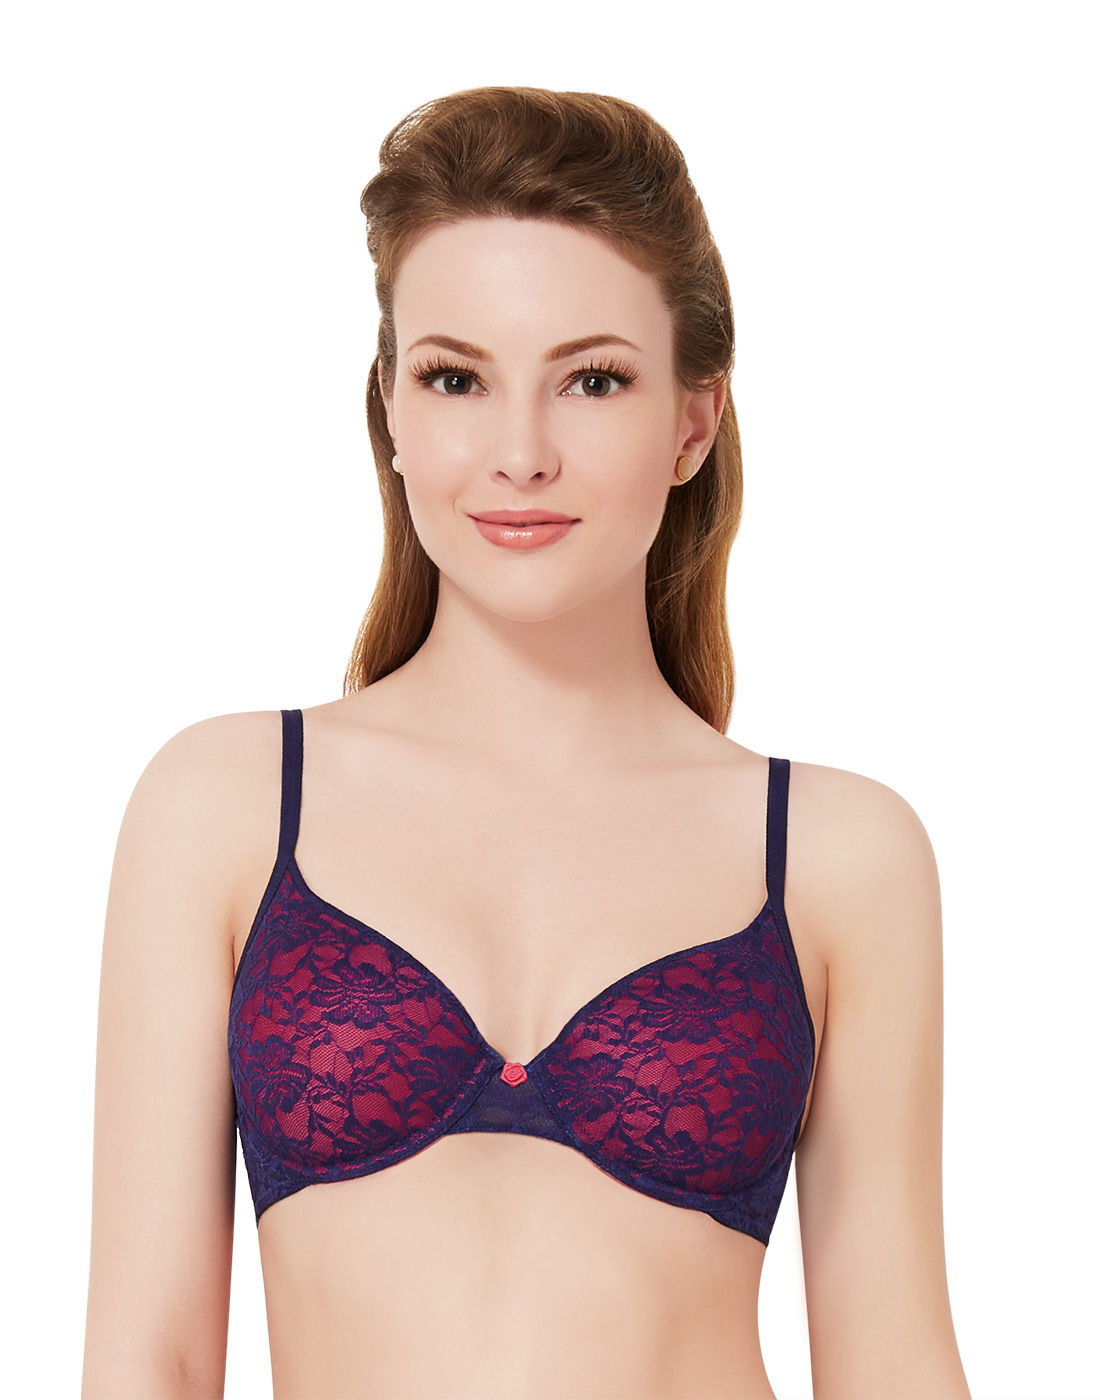 Amante Floral Romance Padded Wired Neon Pink and Blue T-Shirt Bra (38D)